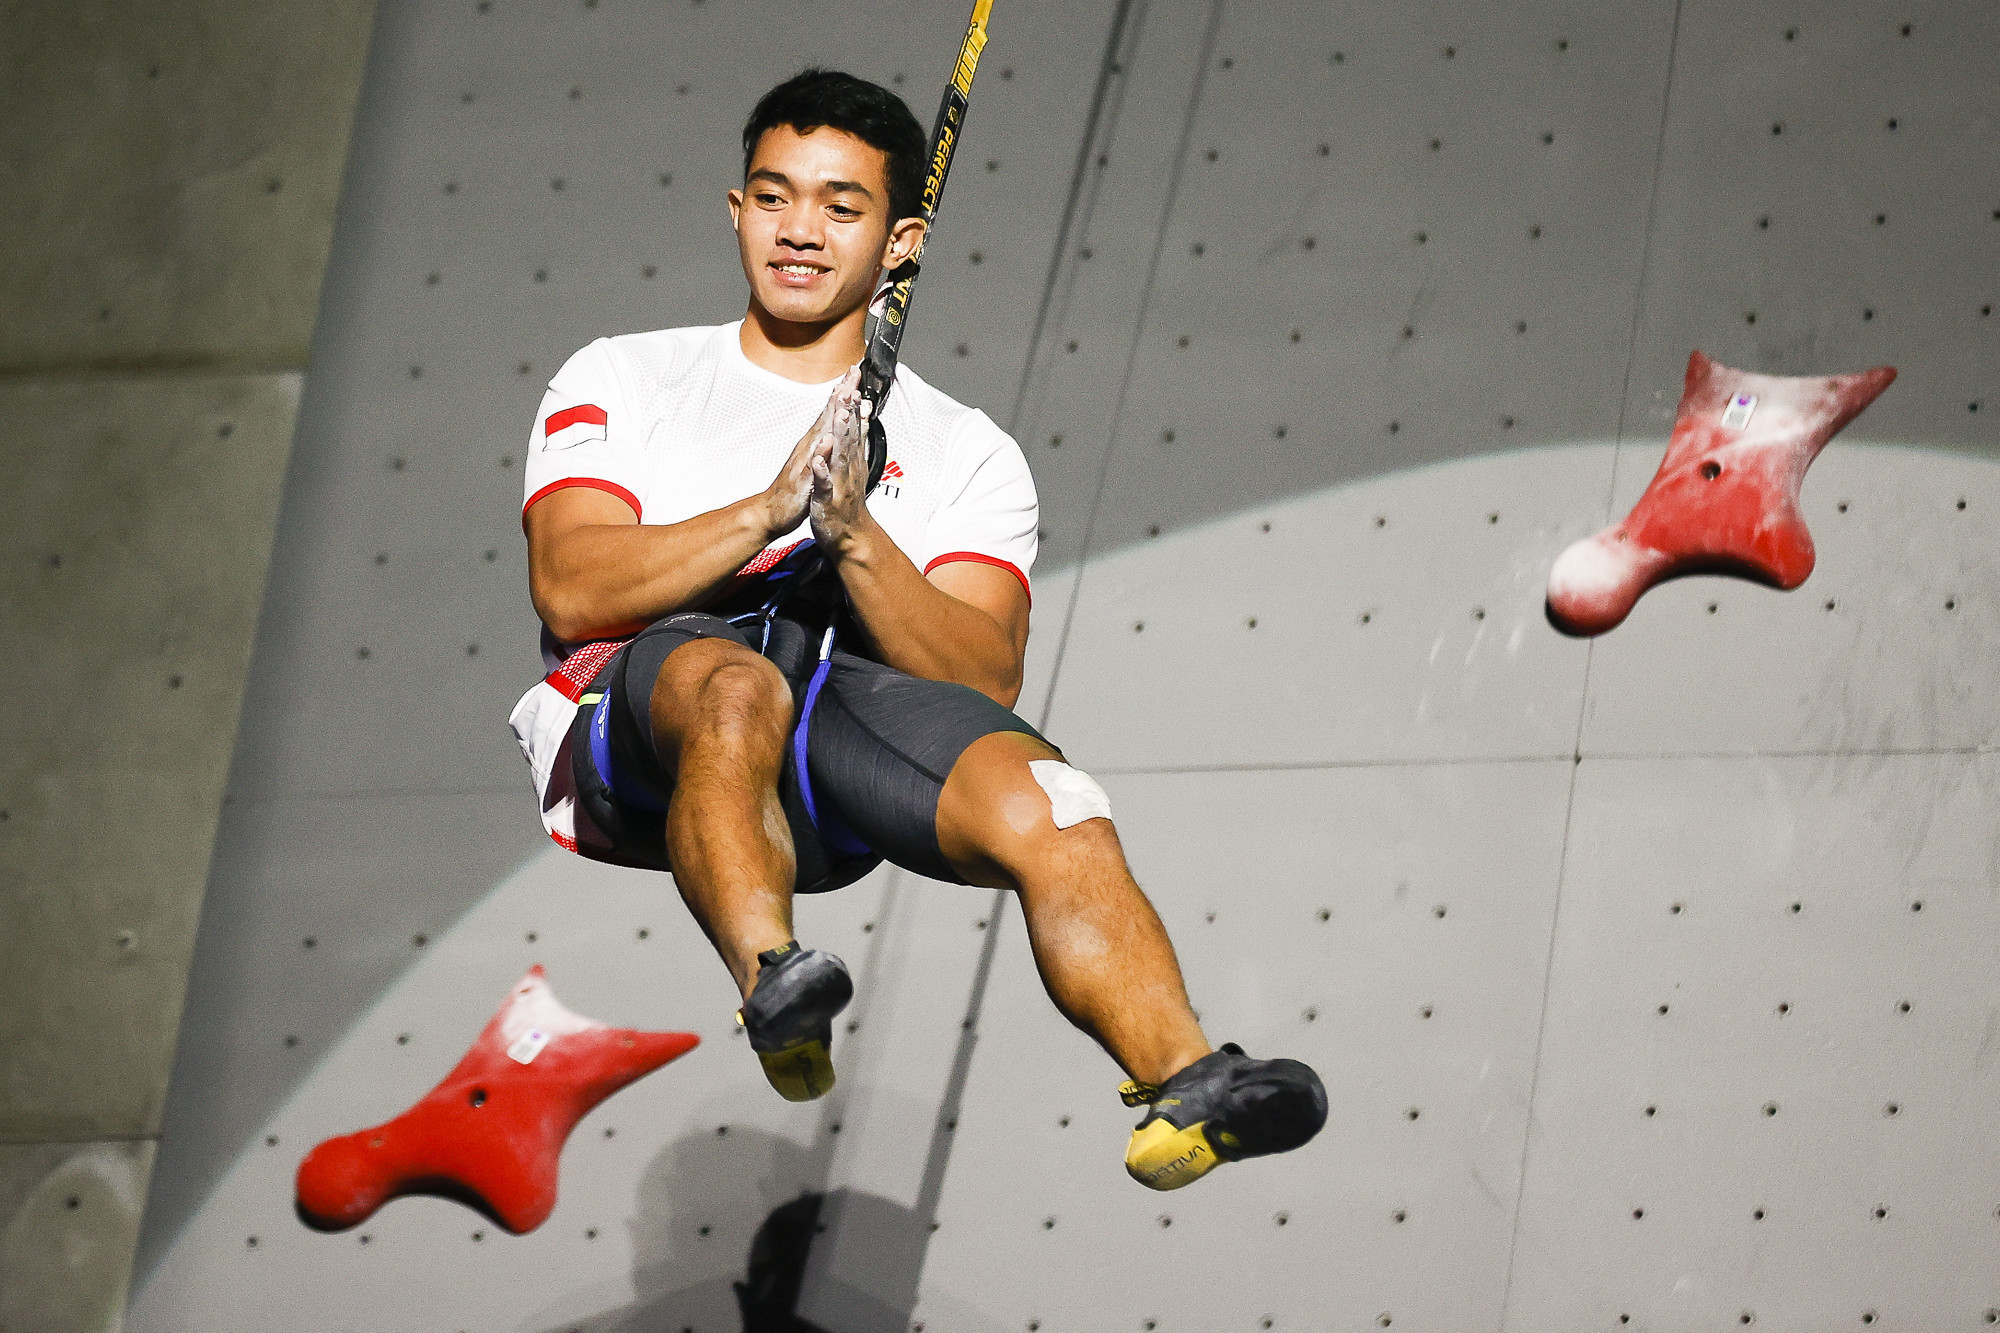 Indonesia's Kiromal Katibin set a men's speed world record in at this year's IFSC World Cup Seoul ©Dimitris Tosidis/IFSC